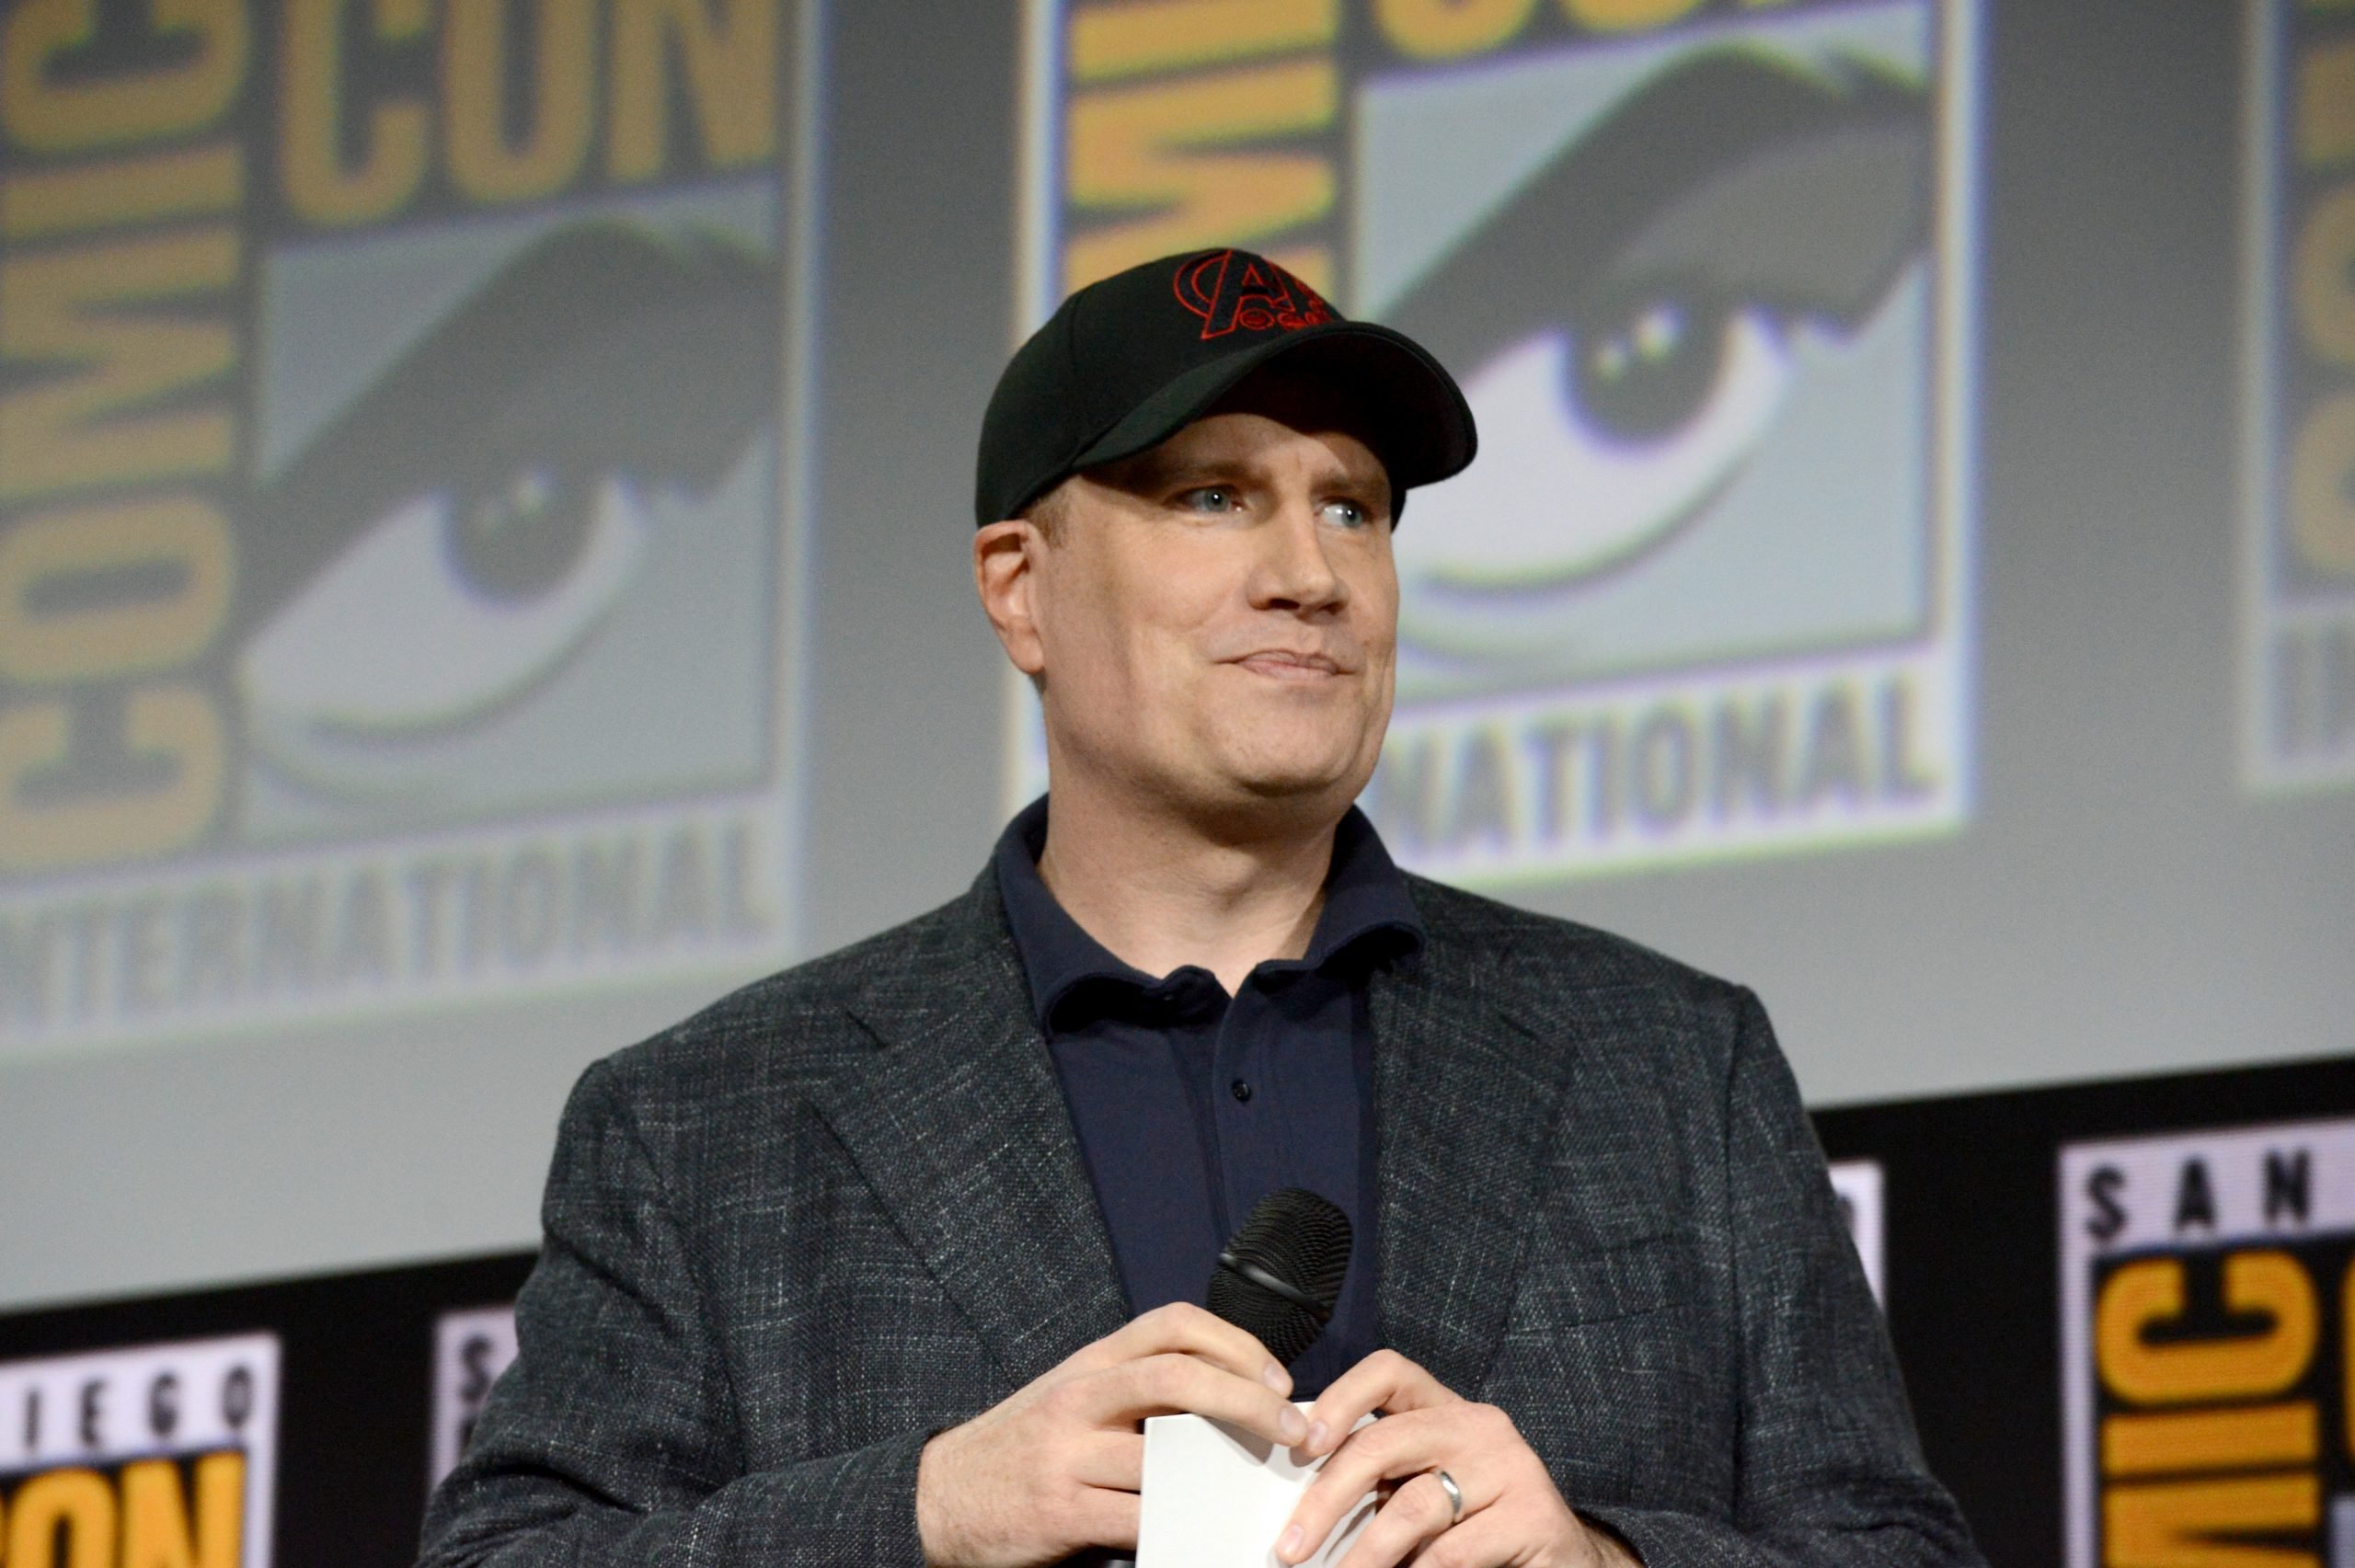 Marvel Studios president Kevin Feige appears onstage at San Diego Comic-Con in 2019